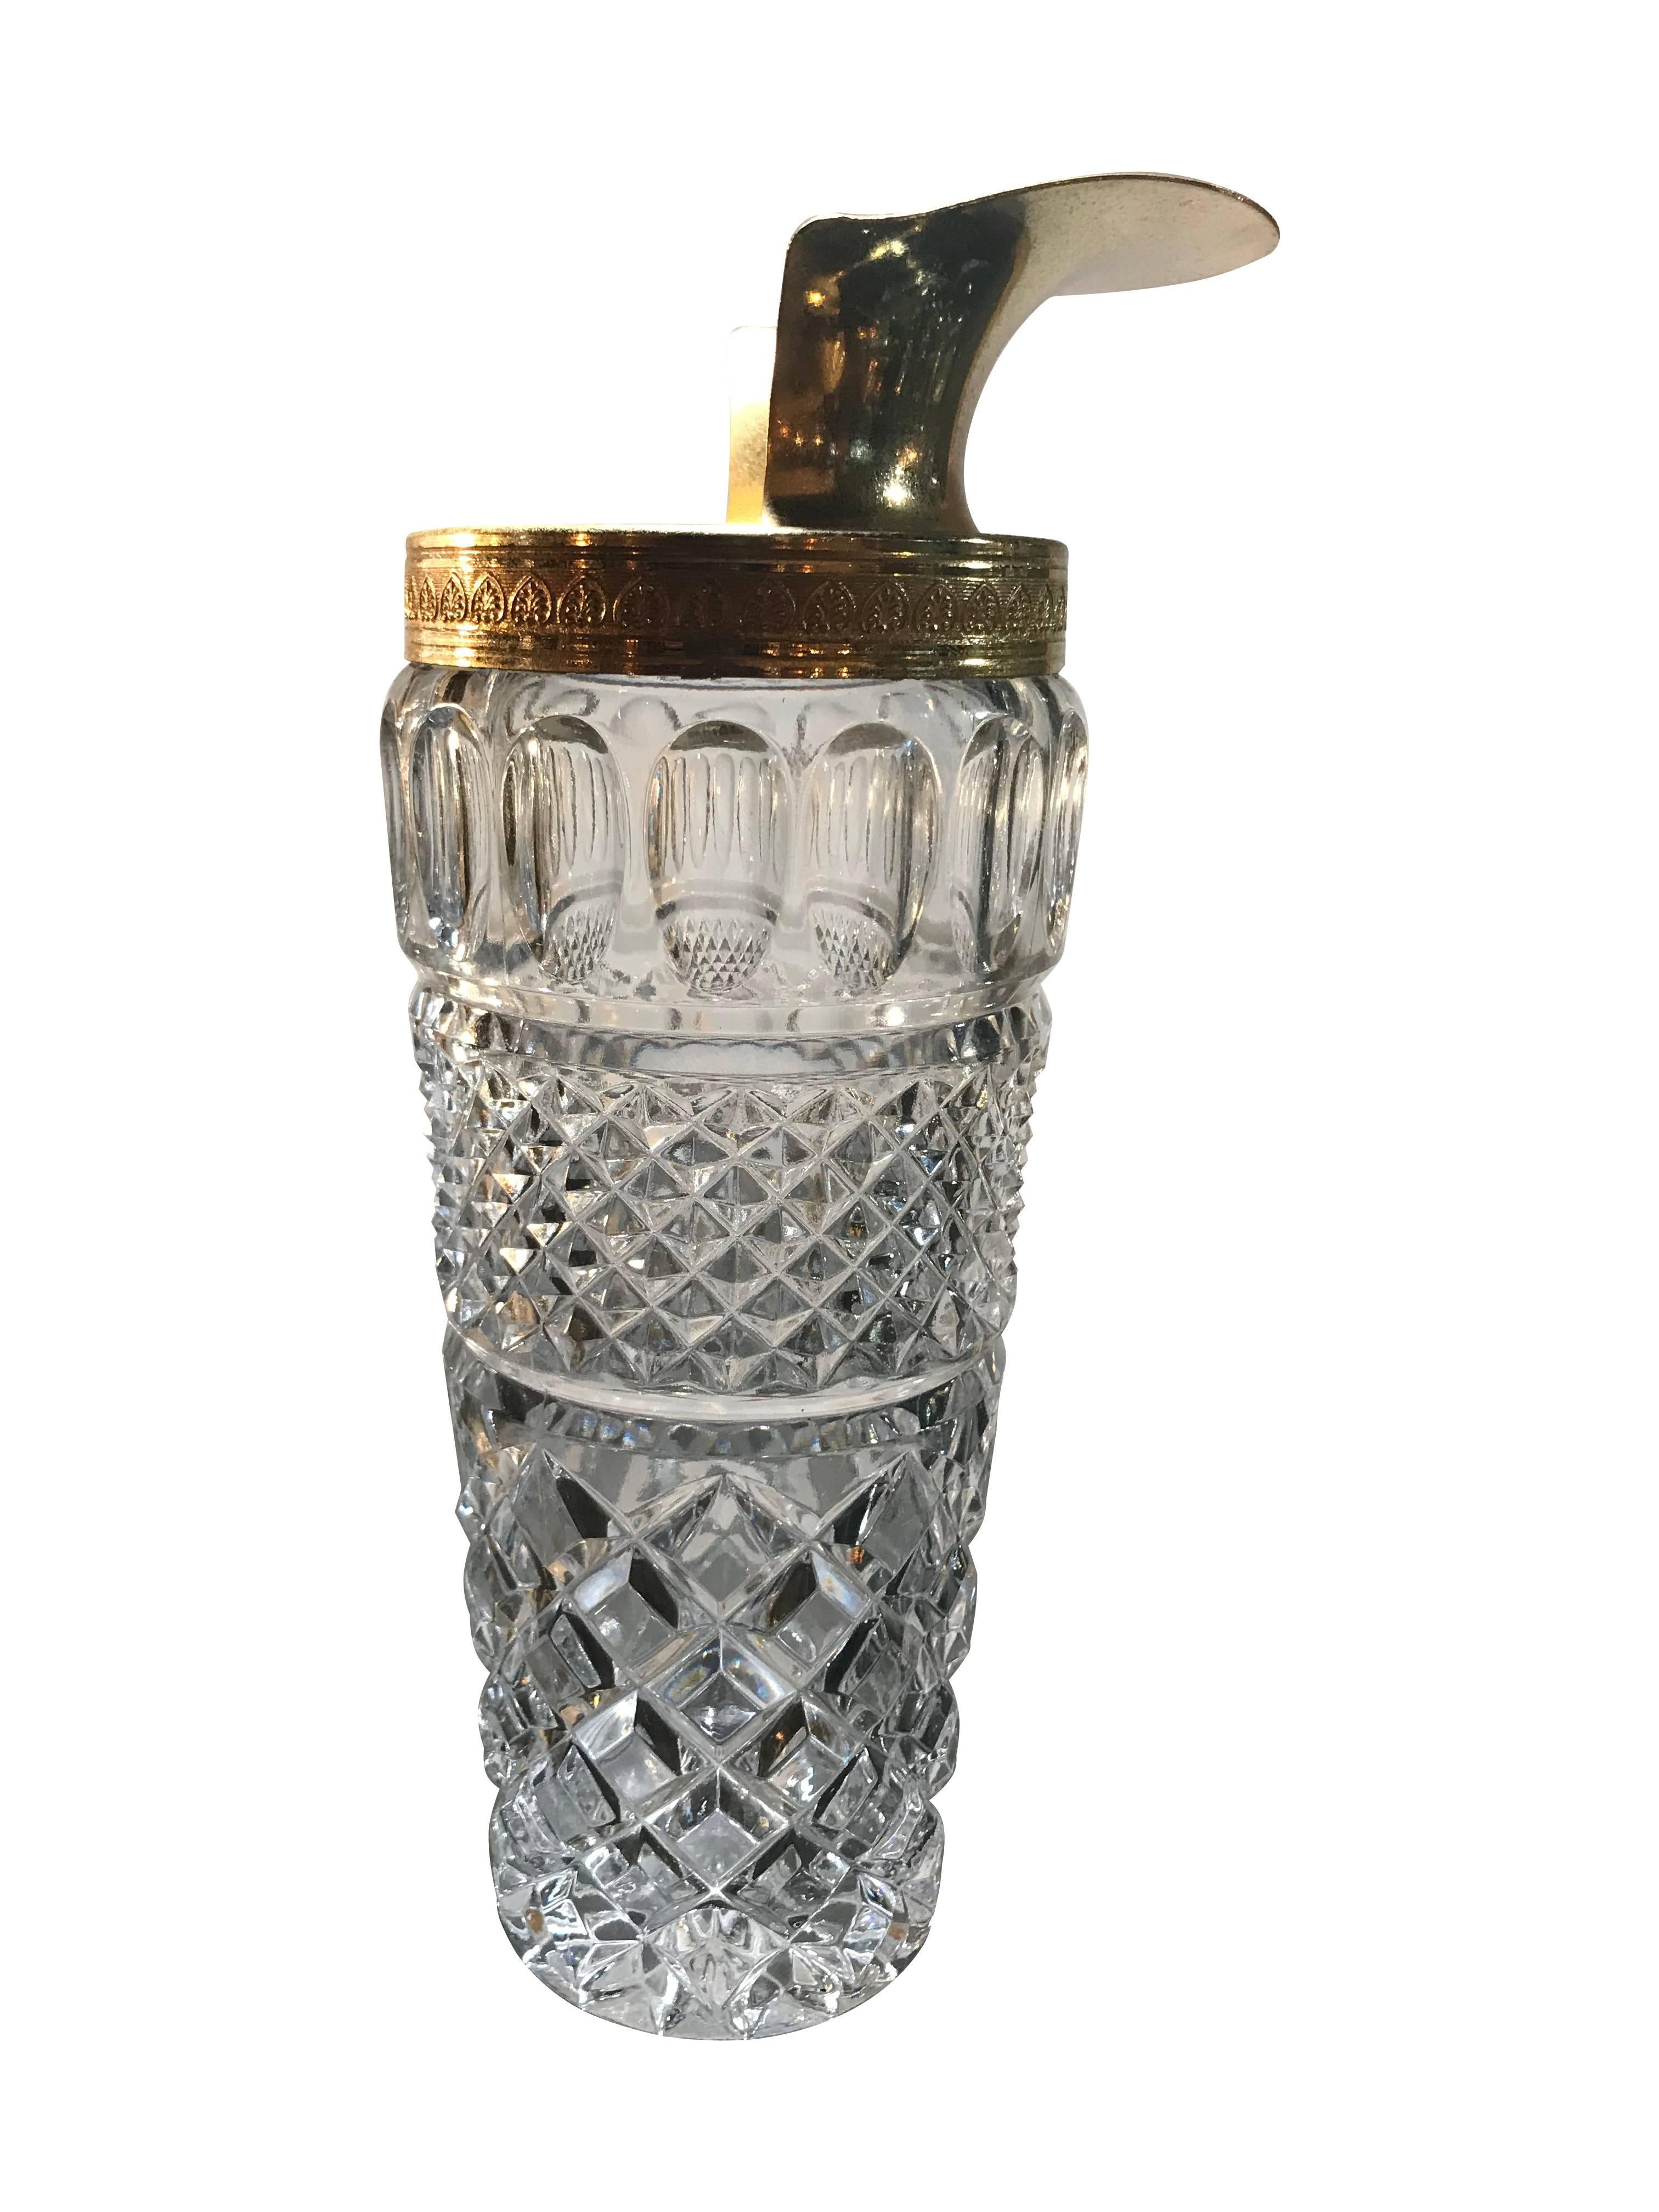 A faceted glass and gilt metal cocktail mixing jug or pourer with gilt metal mixing spoon.